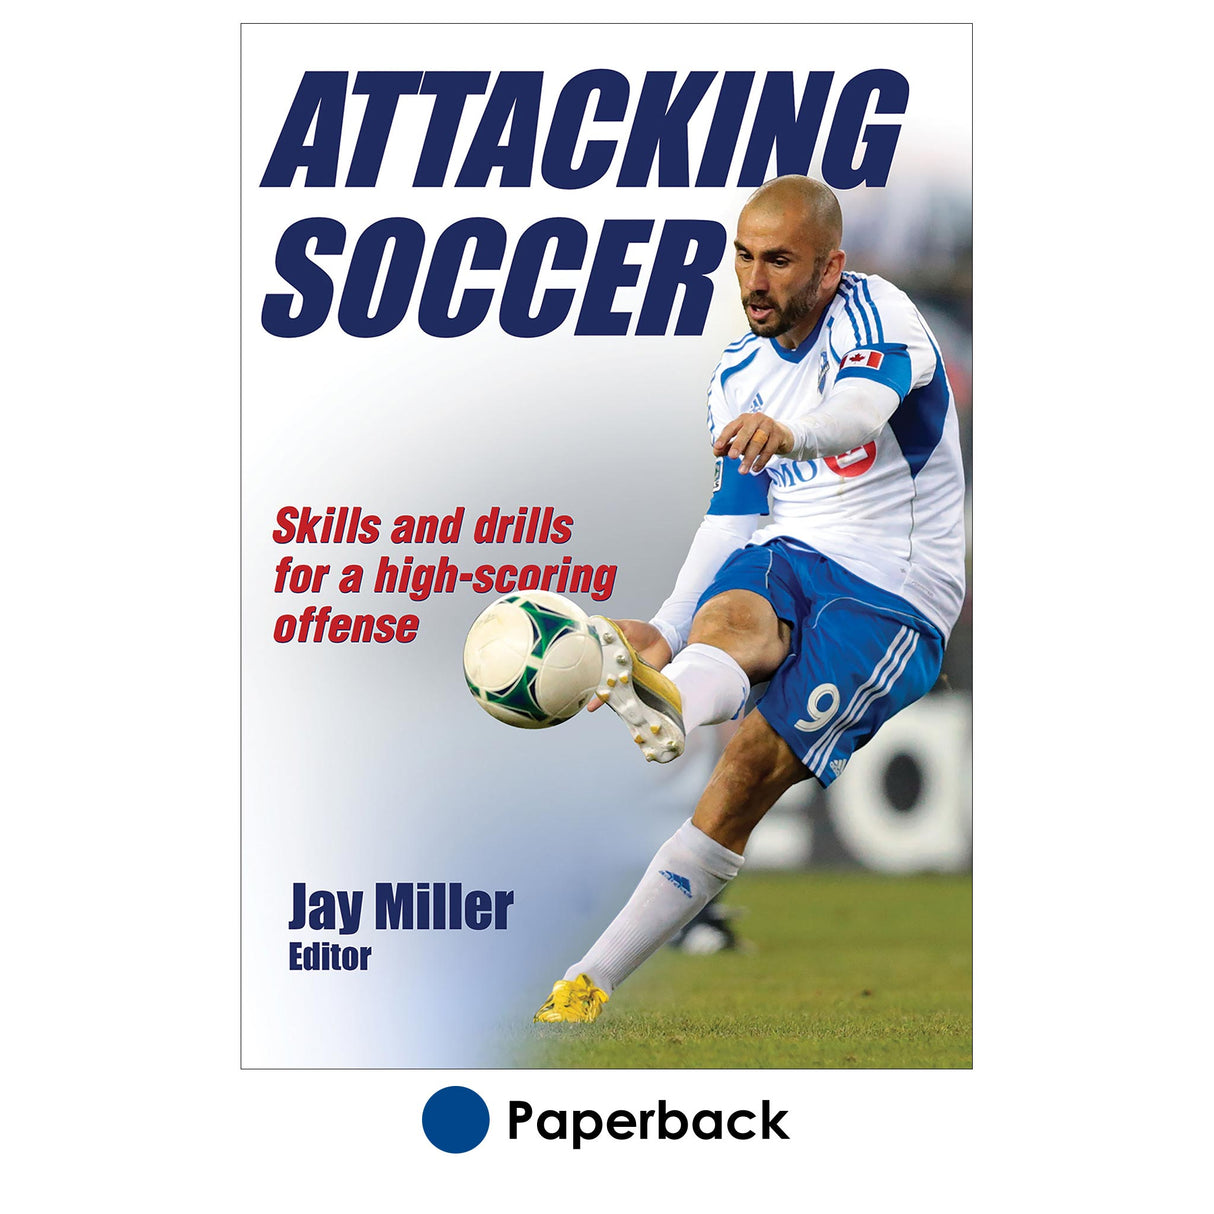 Attacking Soccer